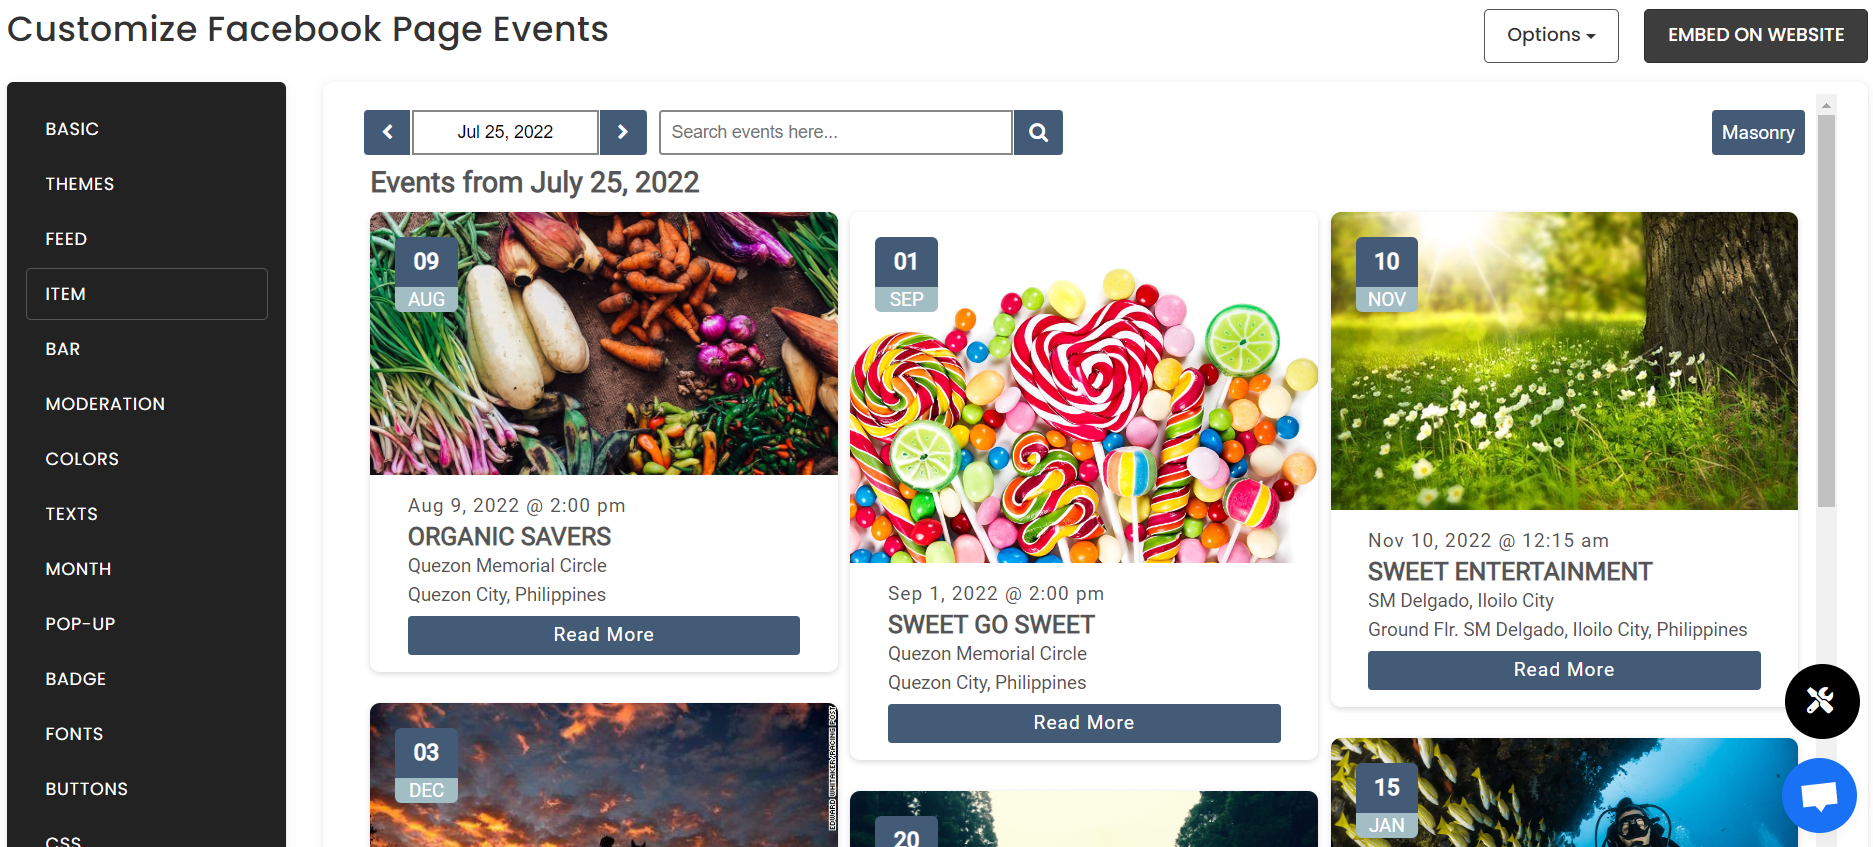 Customize your feed - How To Embed Facebook Page Events On Shopify Website For Free?